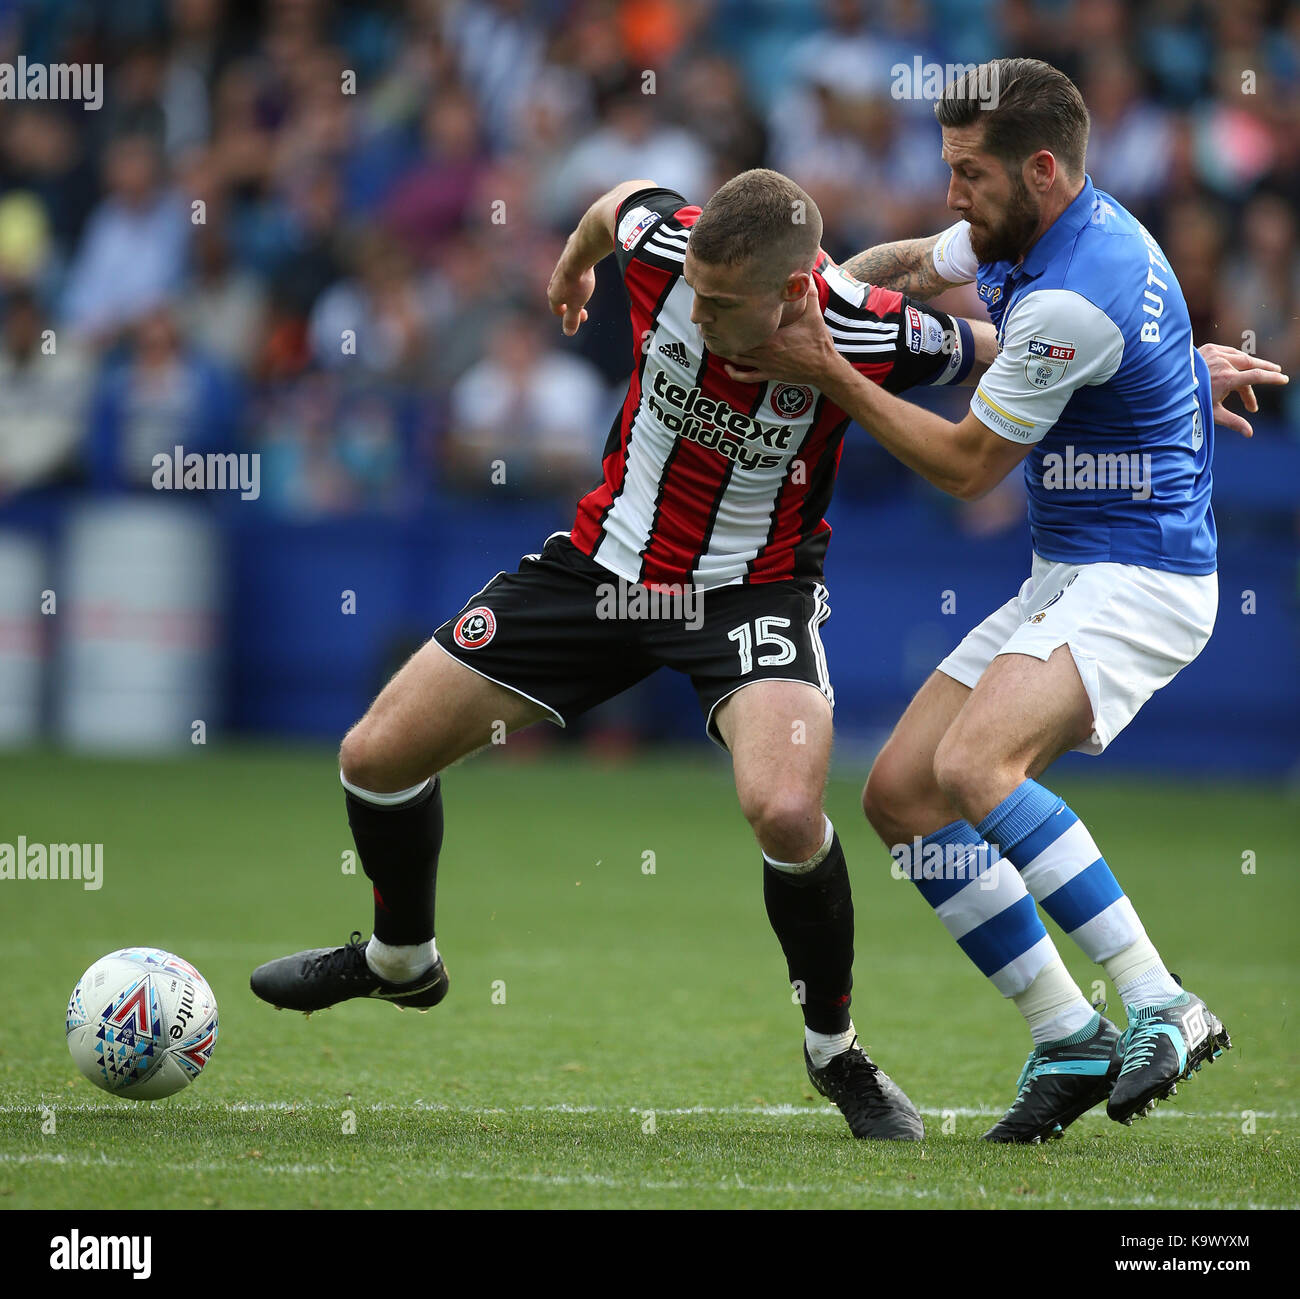 PAUL COUTTS & JACOB BUTTERFIEL SHEFFIELD WEDNESDAY FC V SHEFF HILLSBOROUGH SHEFFIELD ANGLETERRE 24 Septembre 2017 Banque D'Images